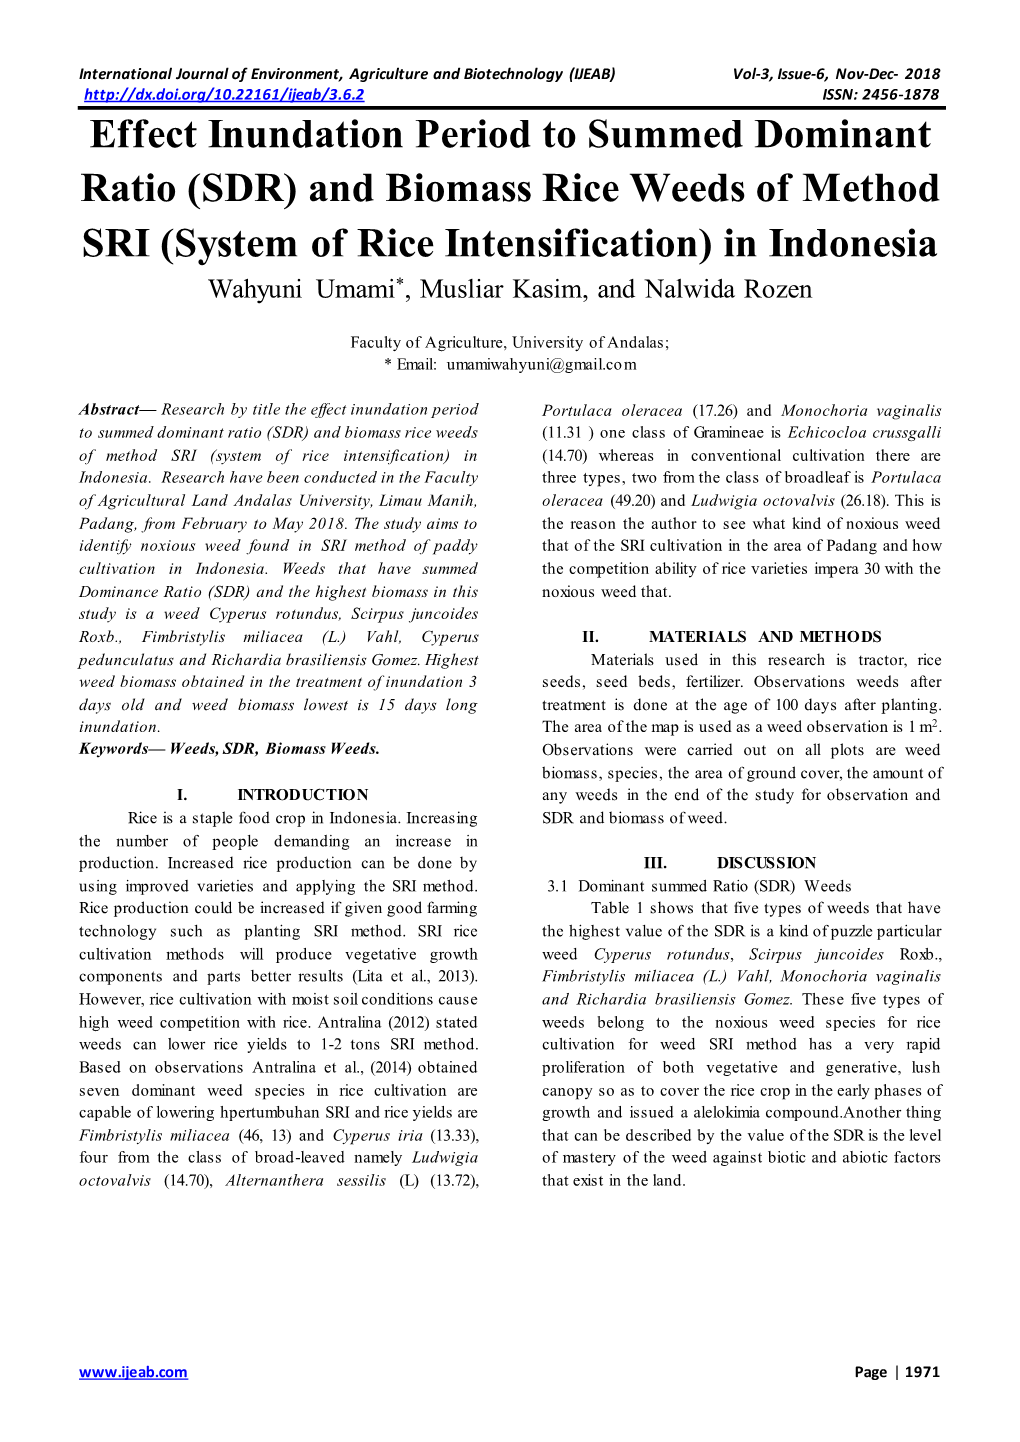 Effect Inundation Period to Summed Dominant Ratio (SDR)